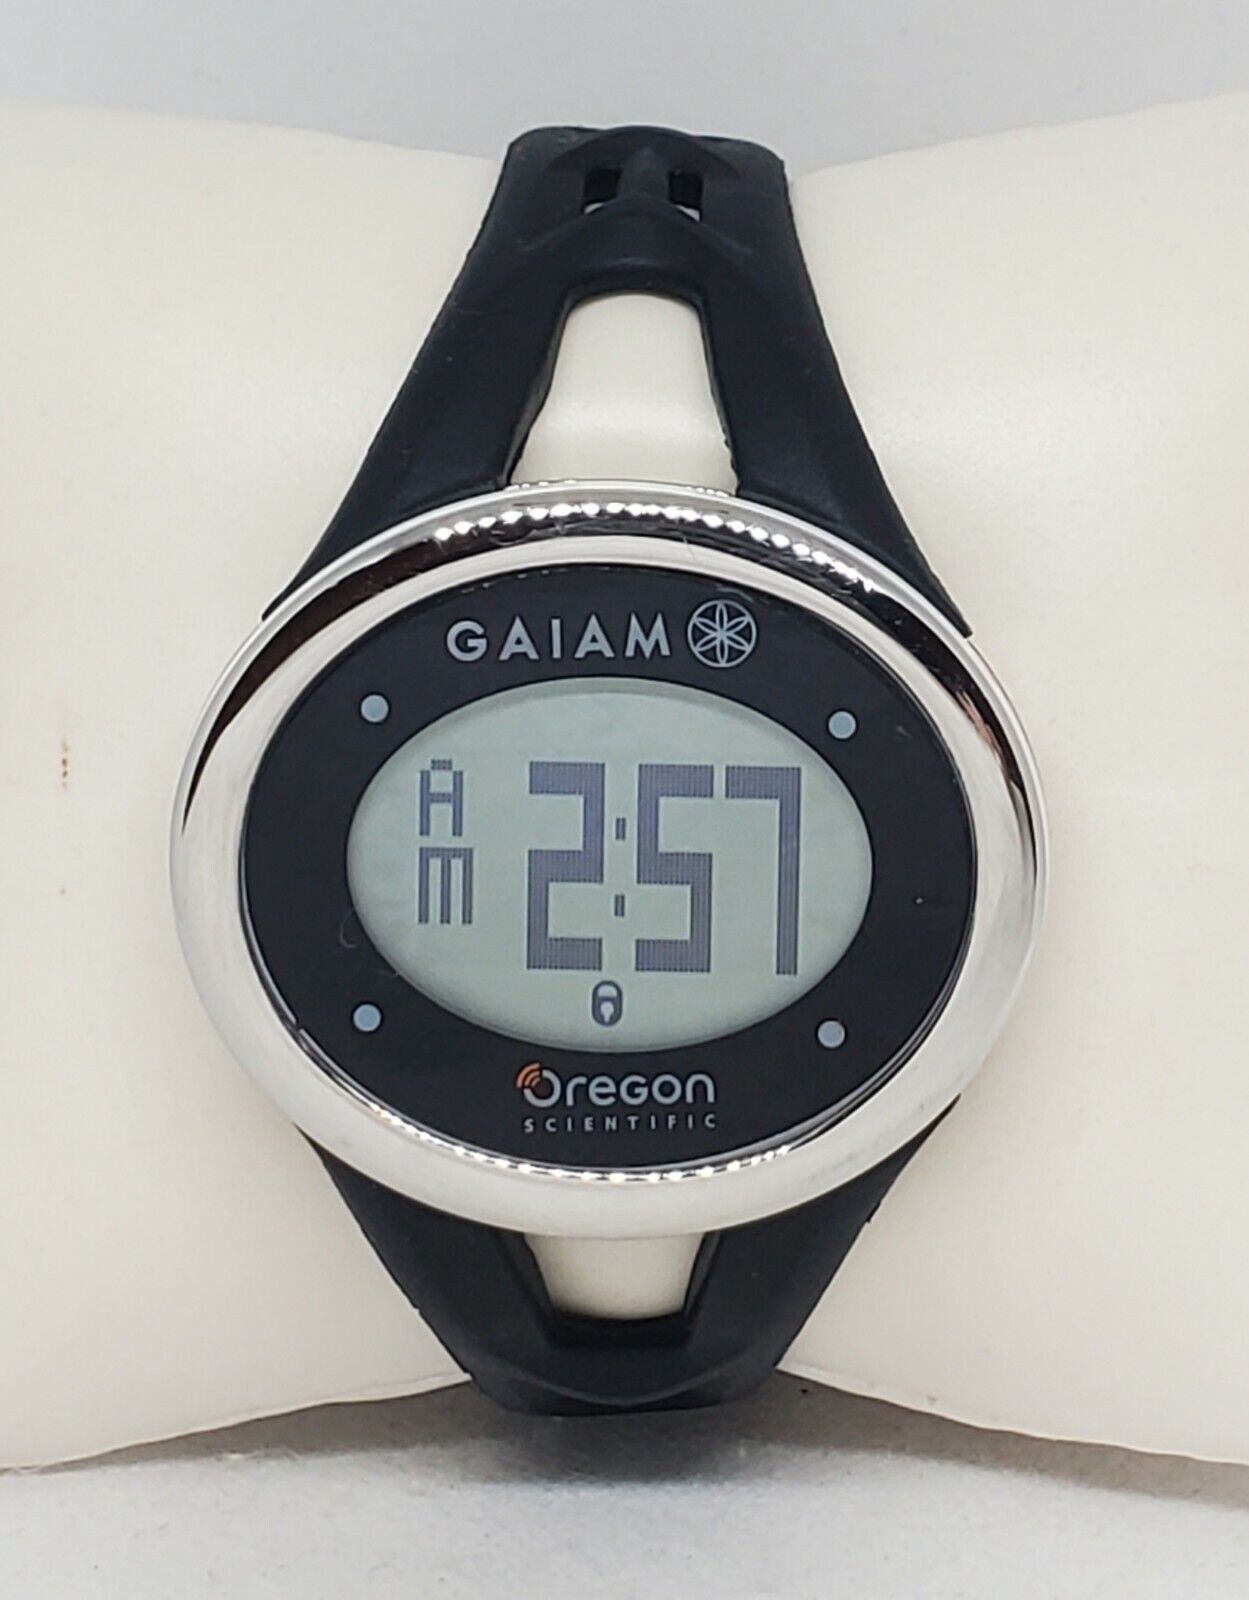 Gaiam by Oregon Scientific Touch Screen Strapless Heart Rate Digital Watch C8